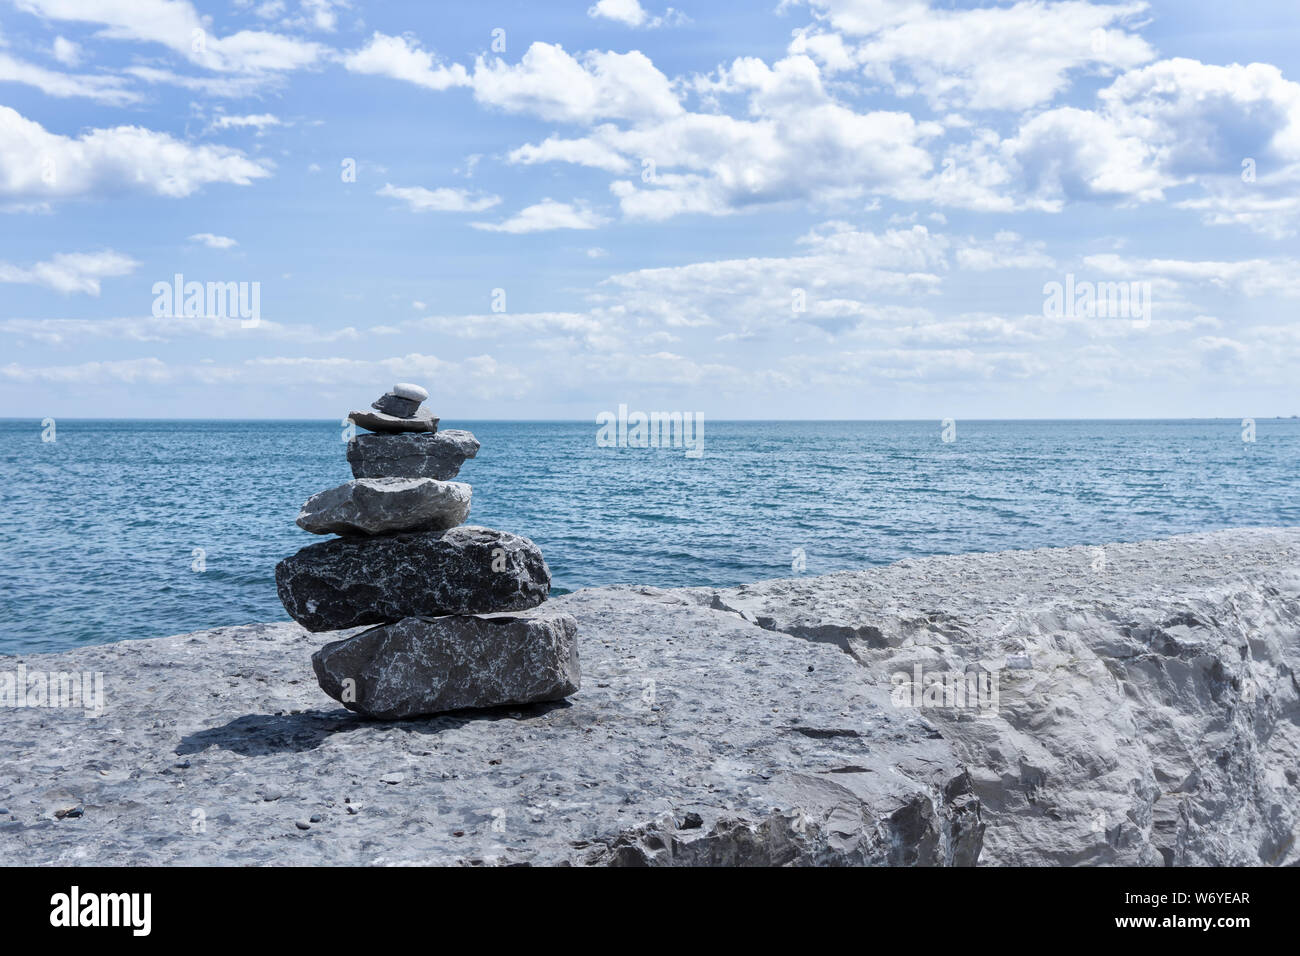 We were here - View on Key Balmy Beach at Ontario, Canada Stock Photo